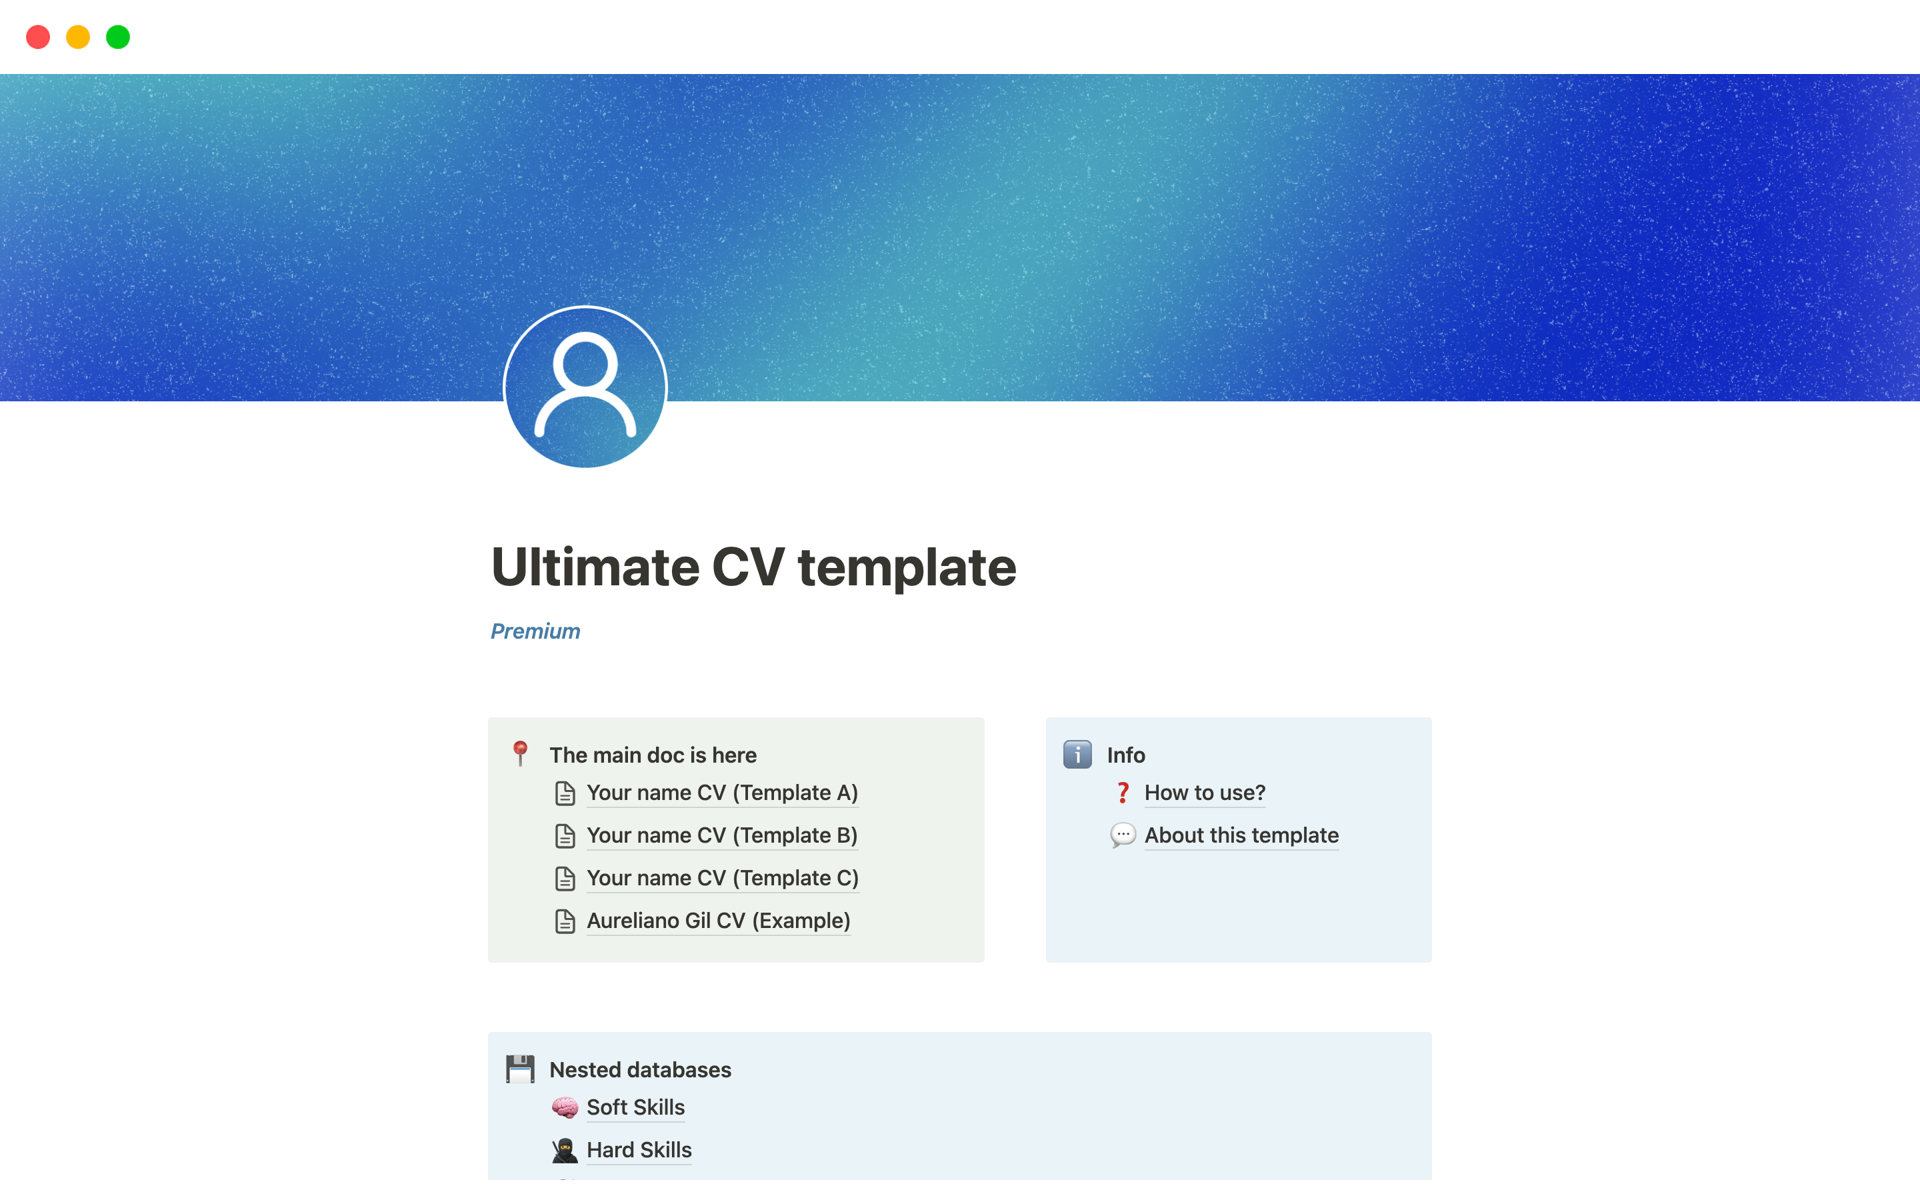 A premium version of the Ultimate CV template